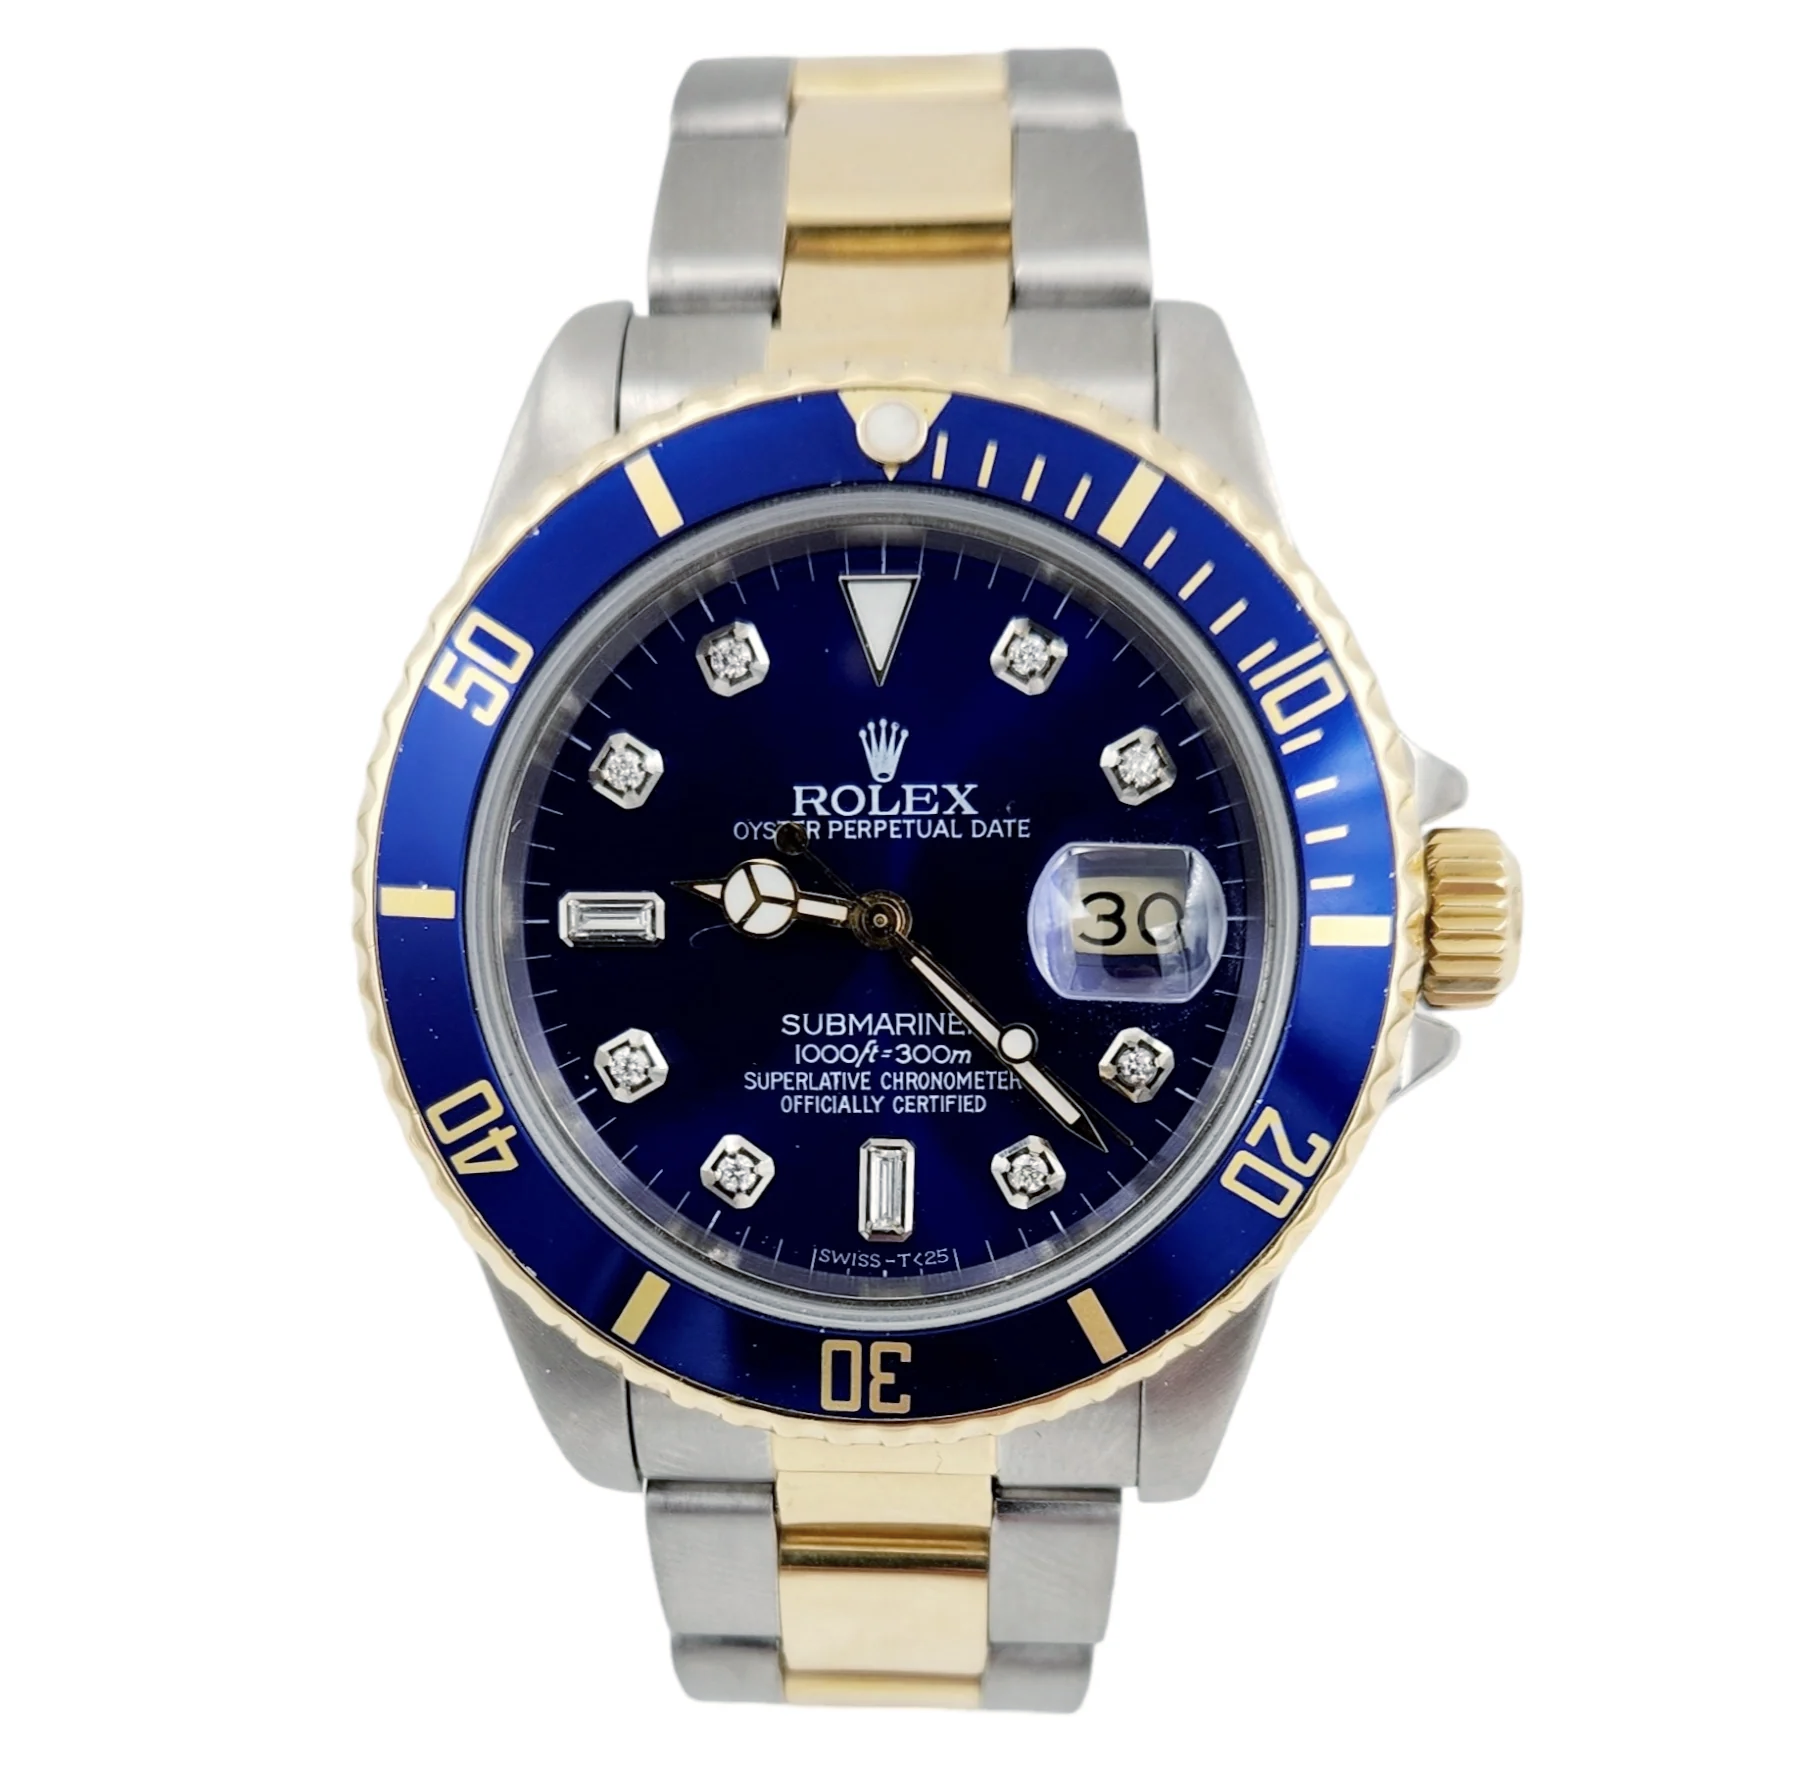 1985 Men's Rolex 40mm Vintage Submariner Oyster Perpetual Two Tone 18K Yellow Gold / Stainless Steel Watch with Blue Diamond Dial and Blue Bezel. (Pre-Owned 16803)